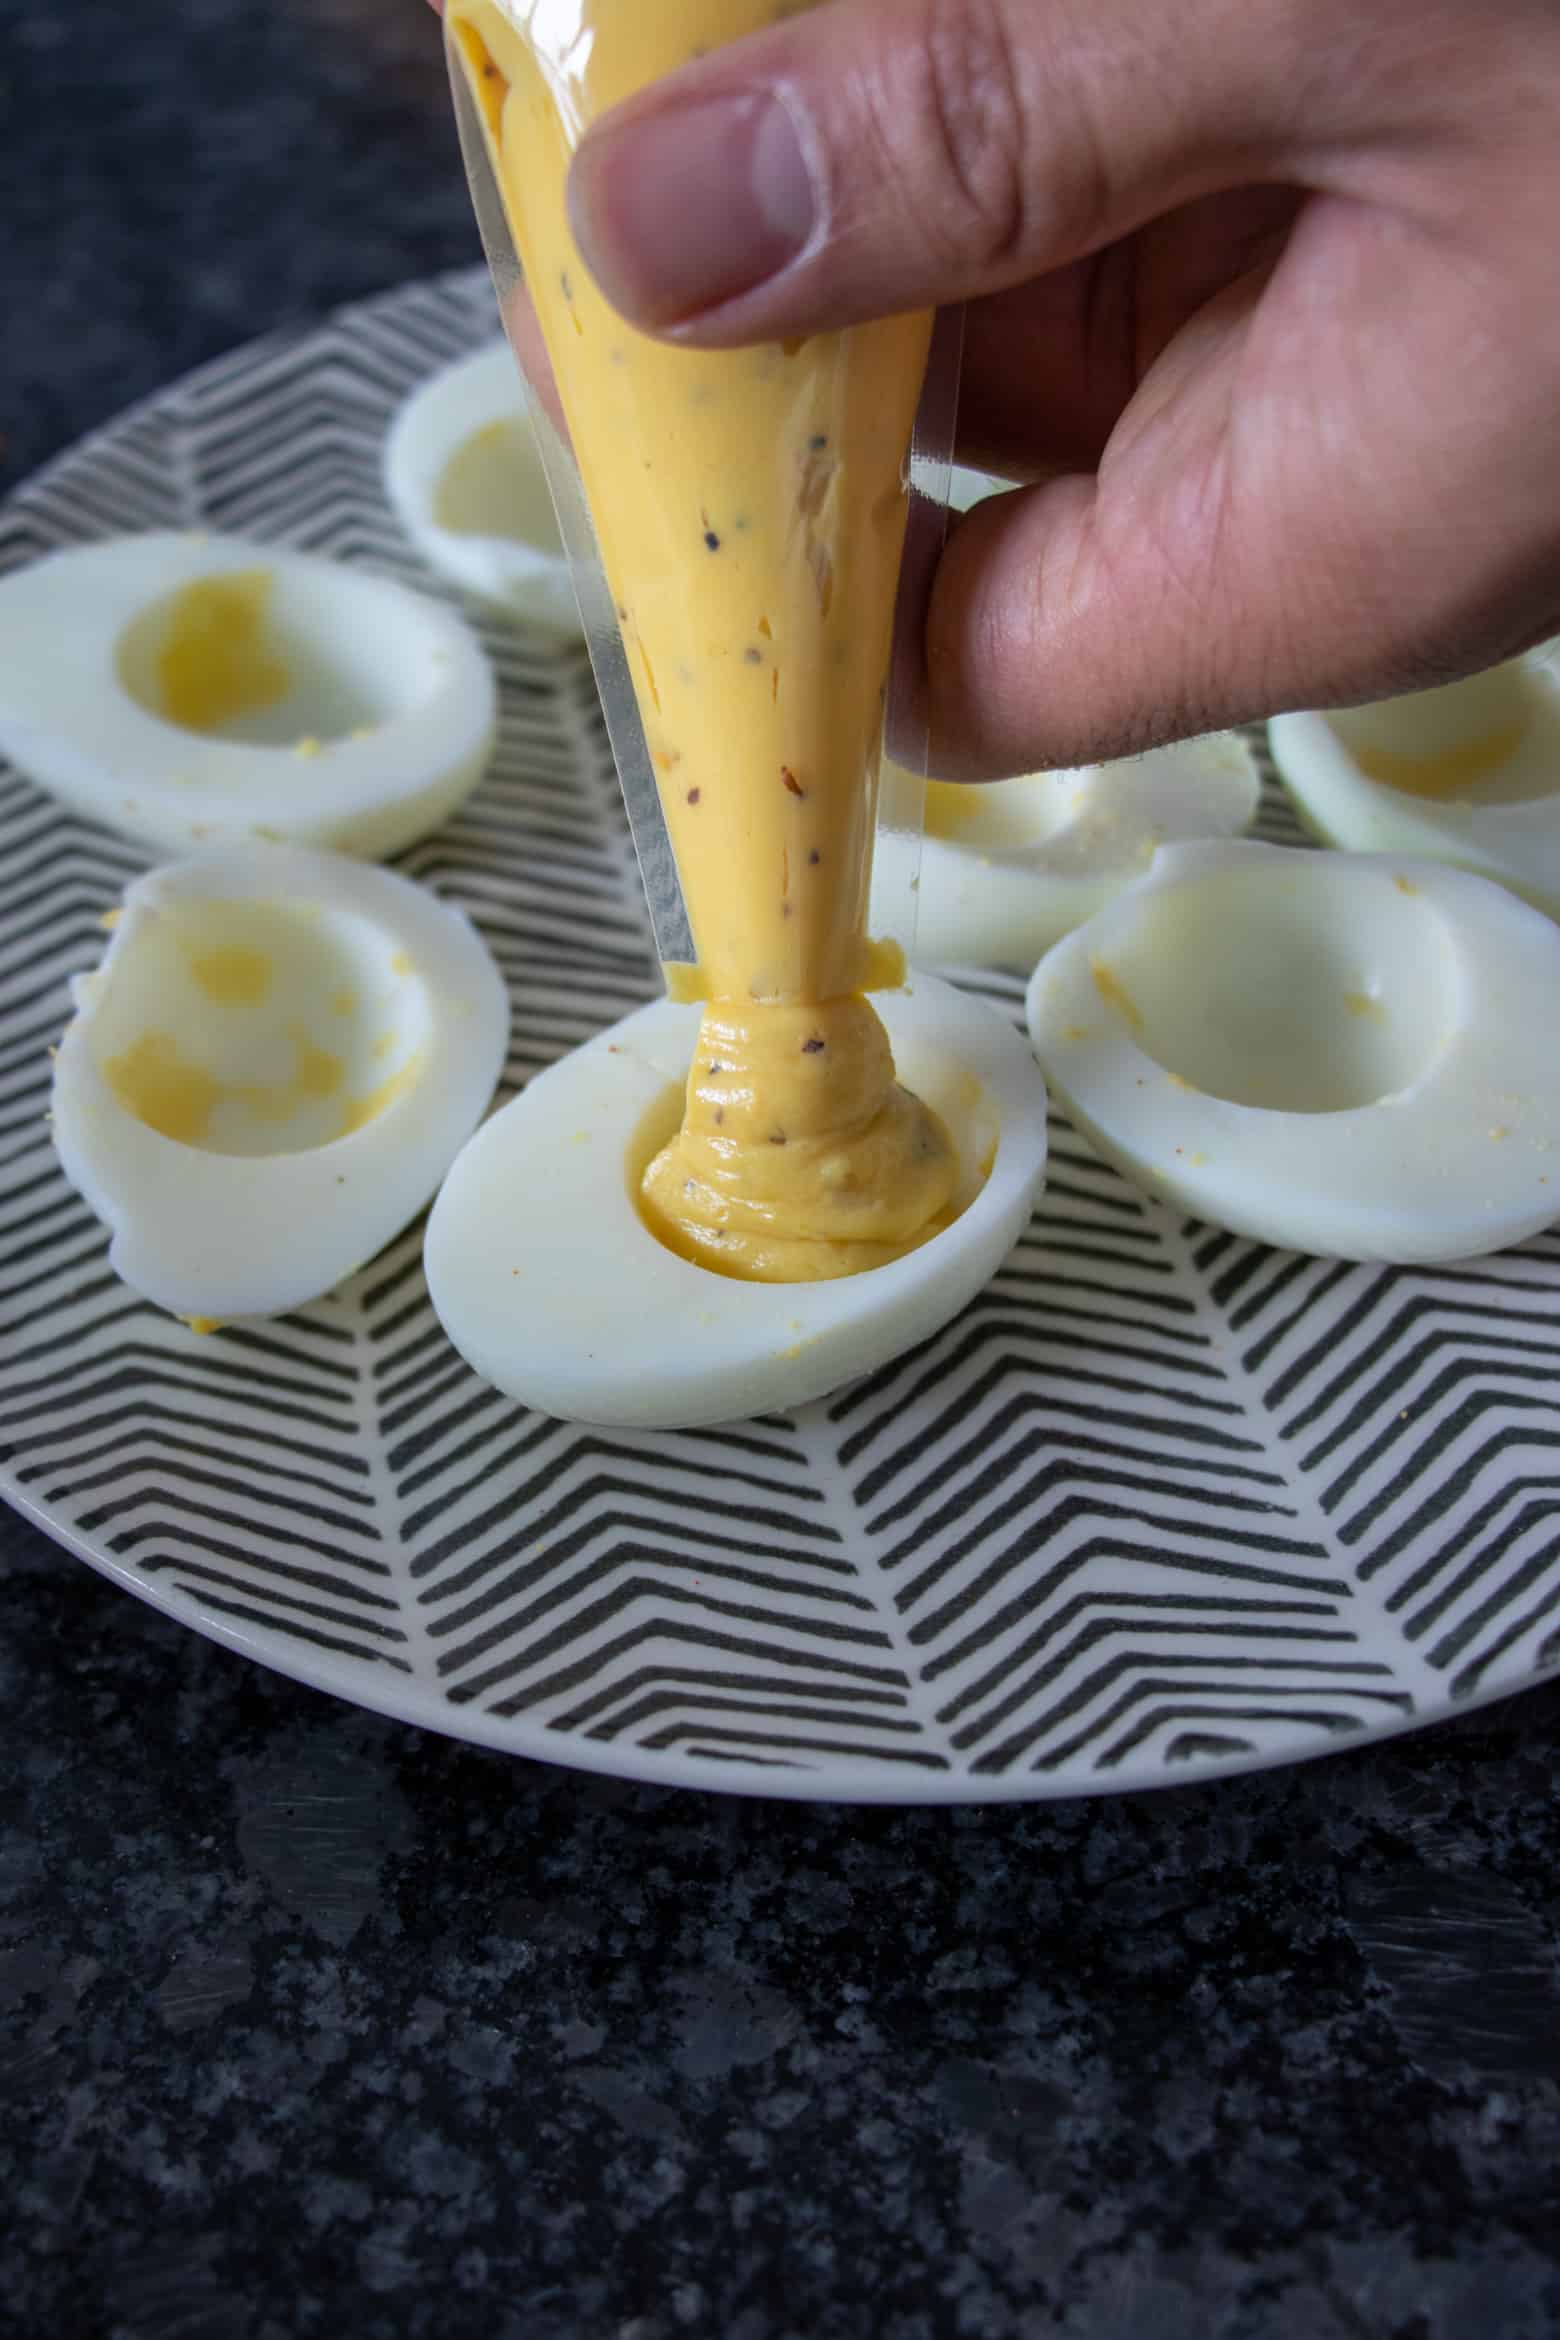 Southern Deviled Eggs being filled using a piping bag.